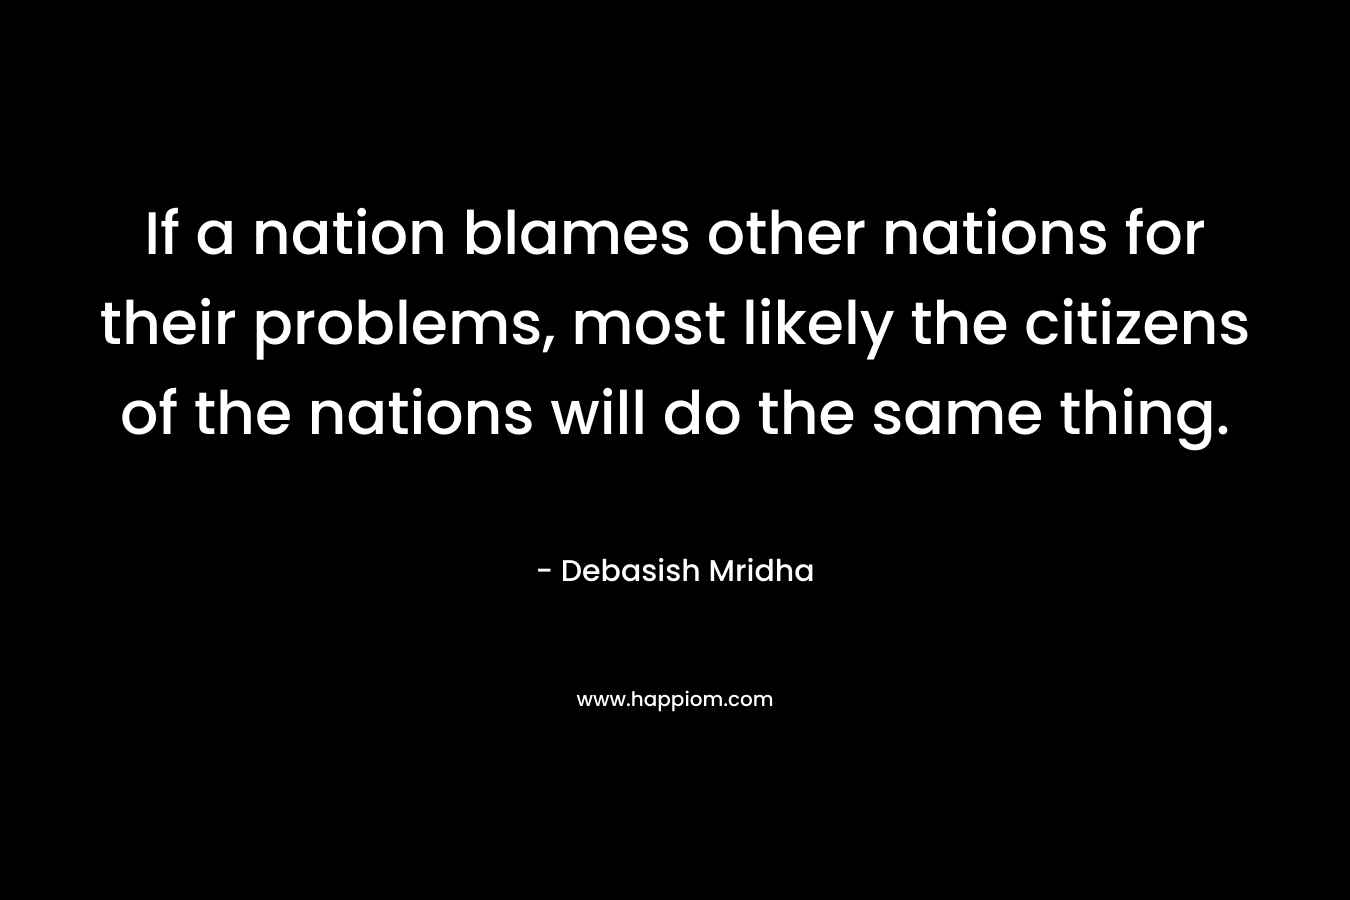 If a nation blames other nations for their problems, most likely the citizens of the nations will do the same thing.